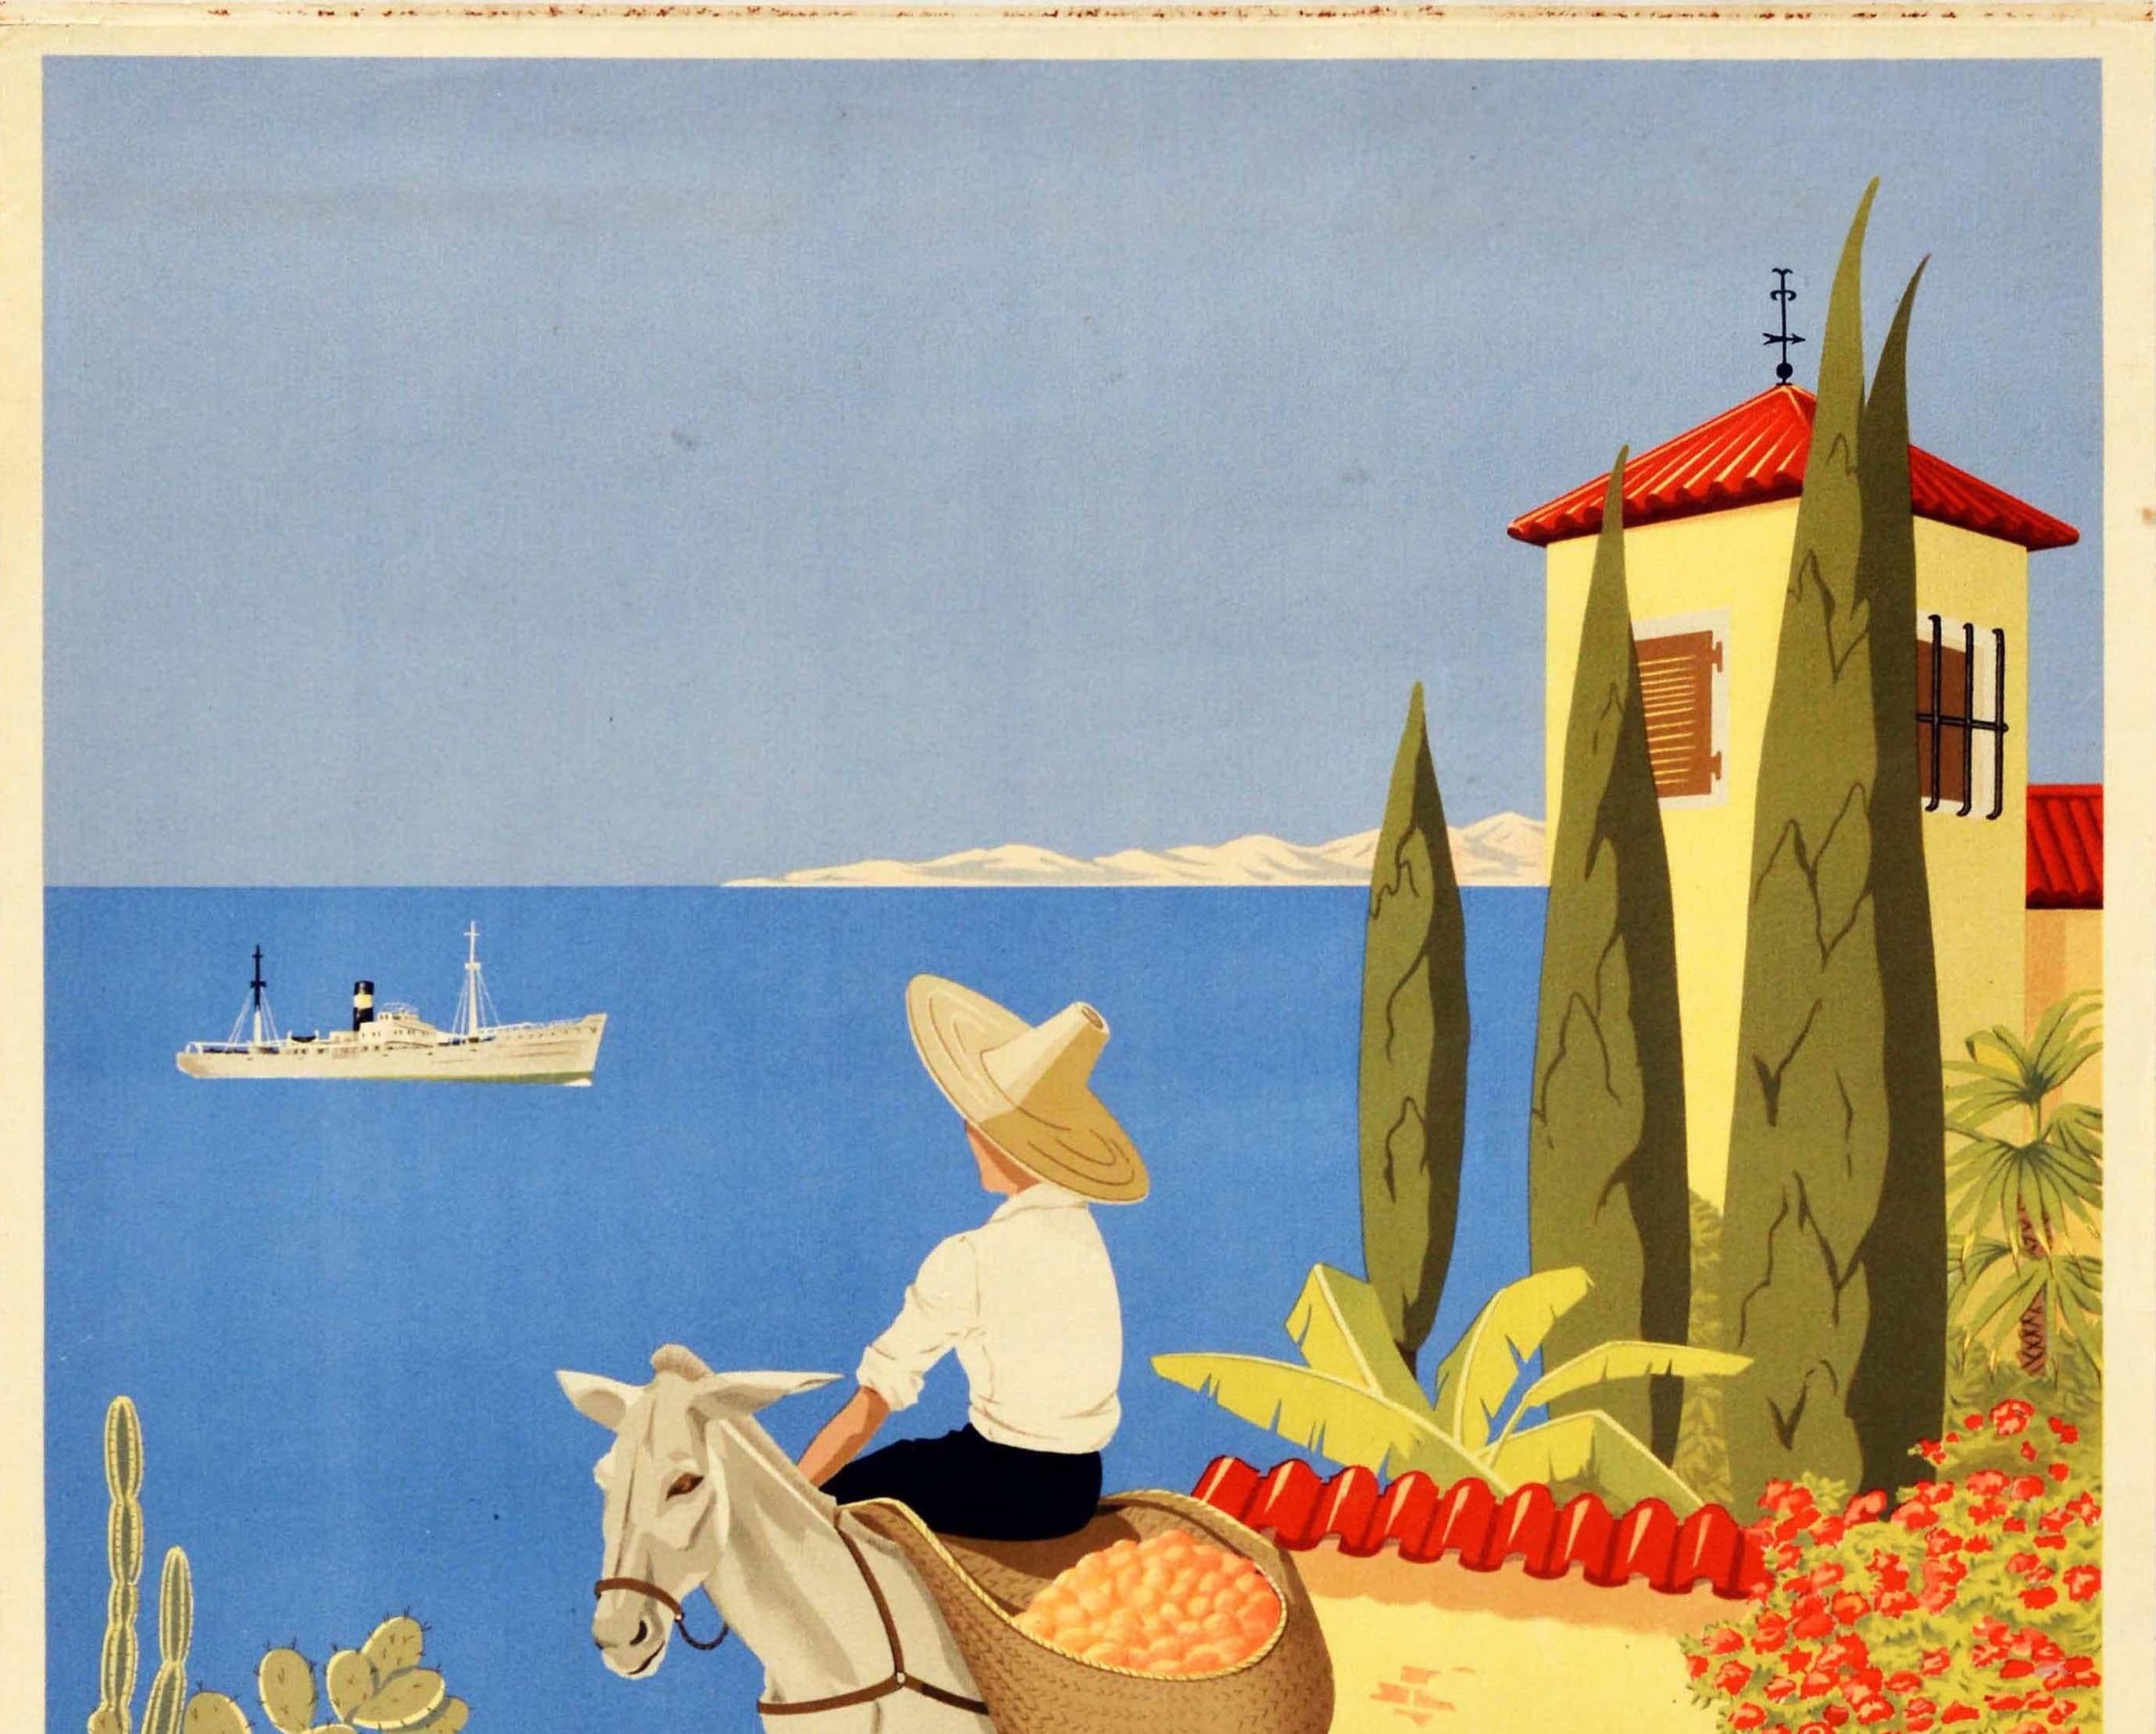 Original Vintage Poster Travel To The Sunny South Sloman Cruise Ship Route Map - Print by Ulla